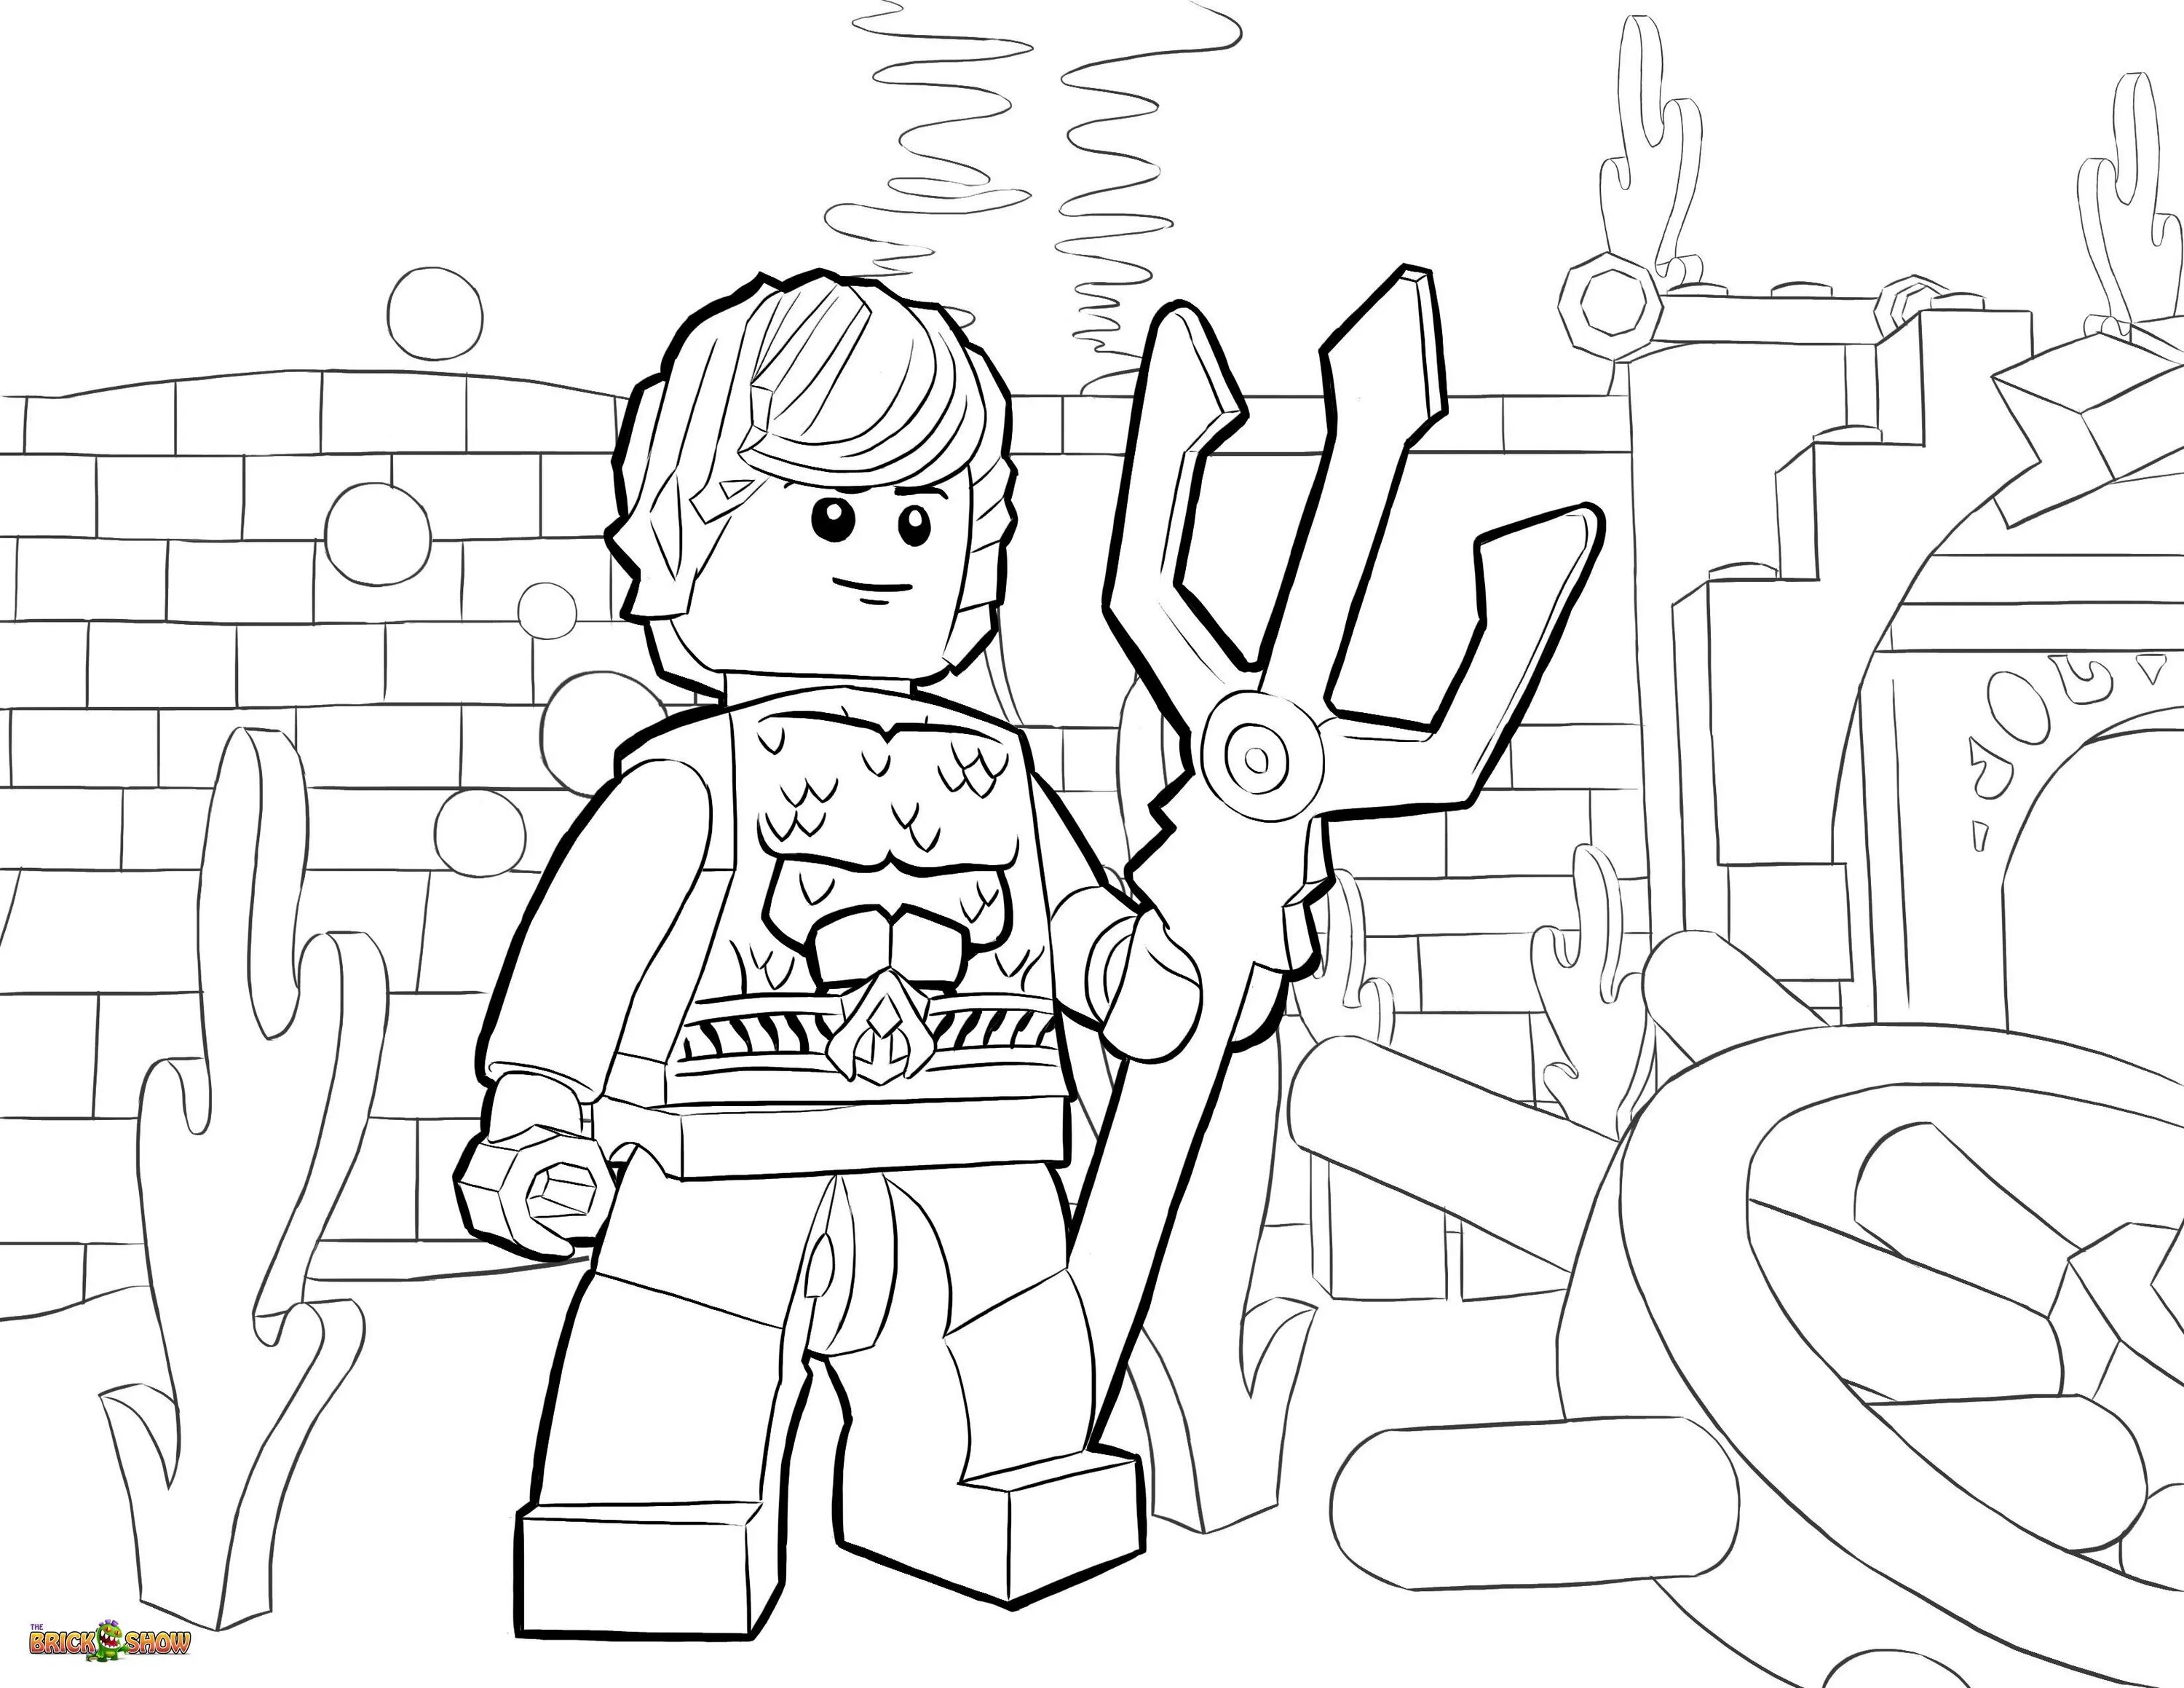 Lego innovative heroes coloring book